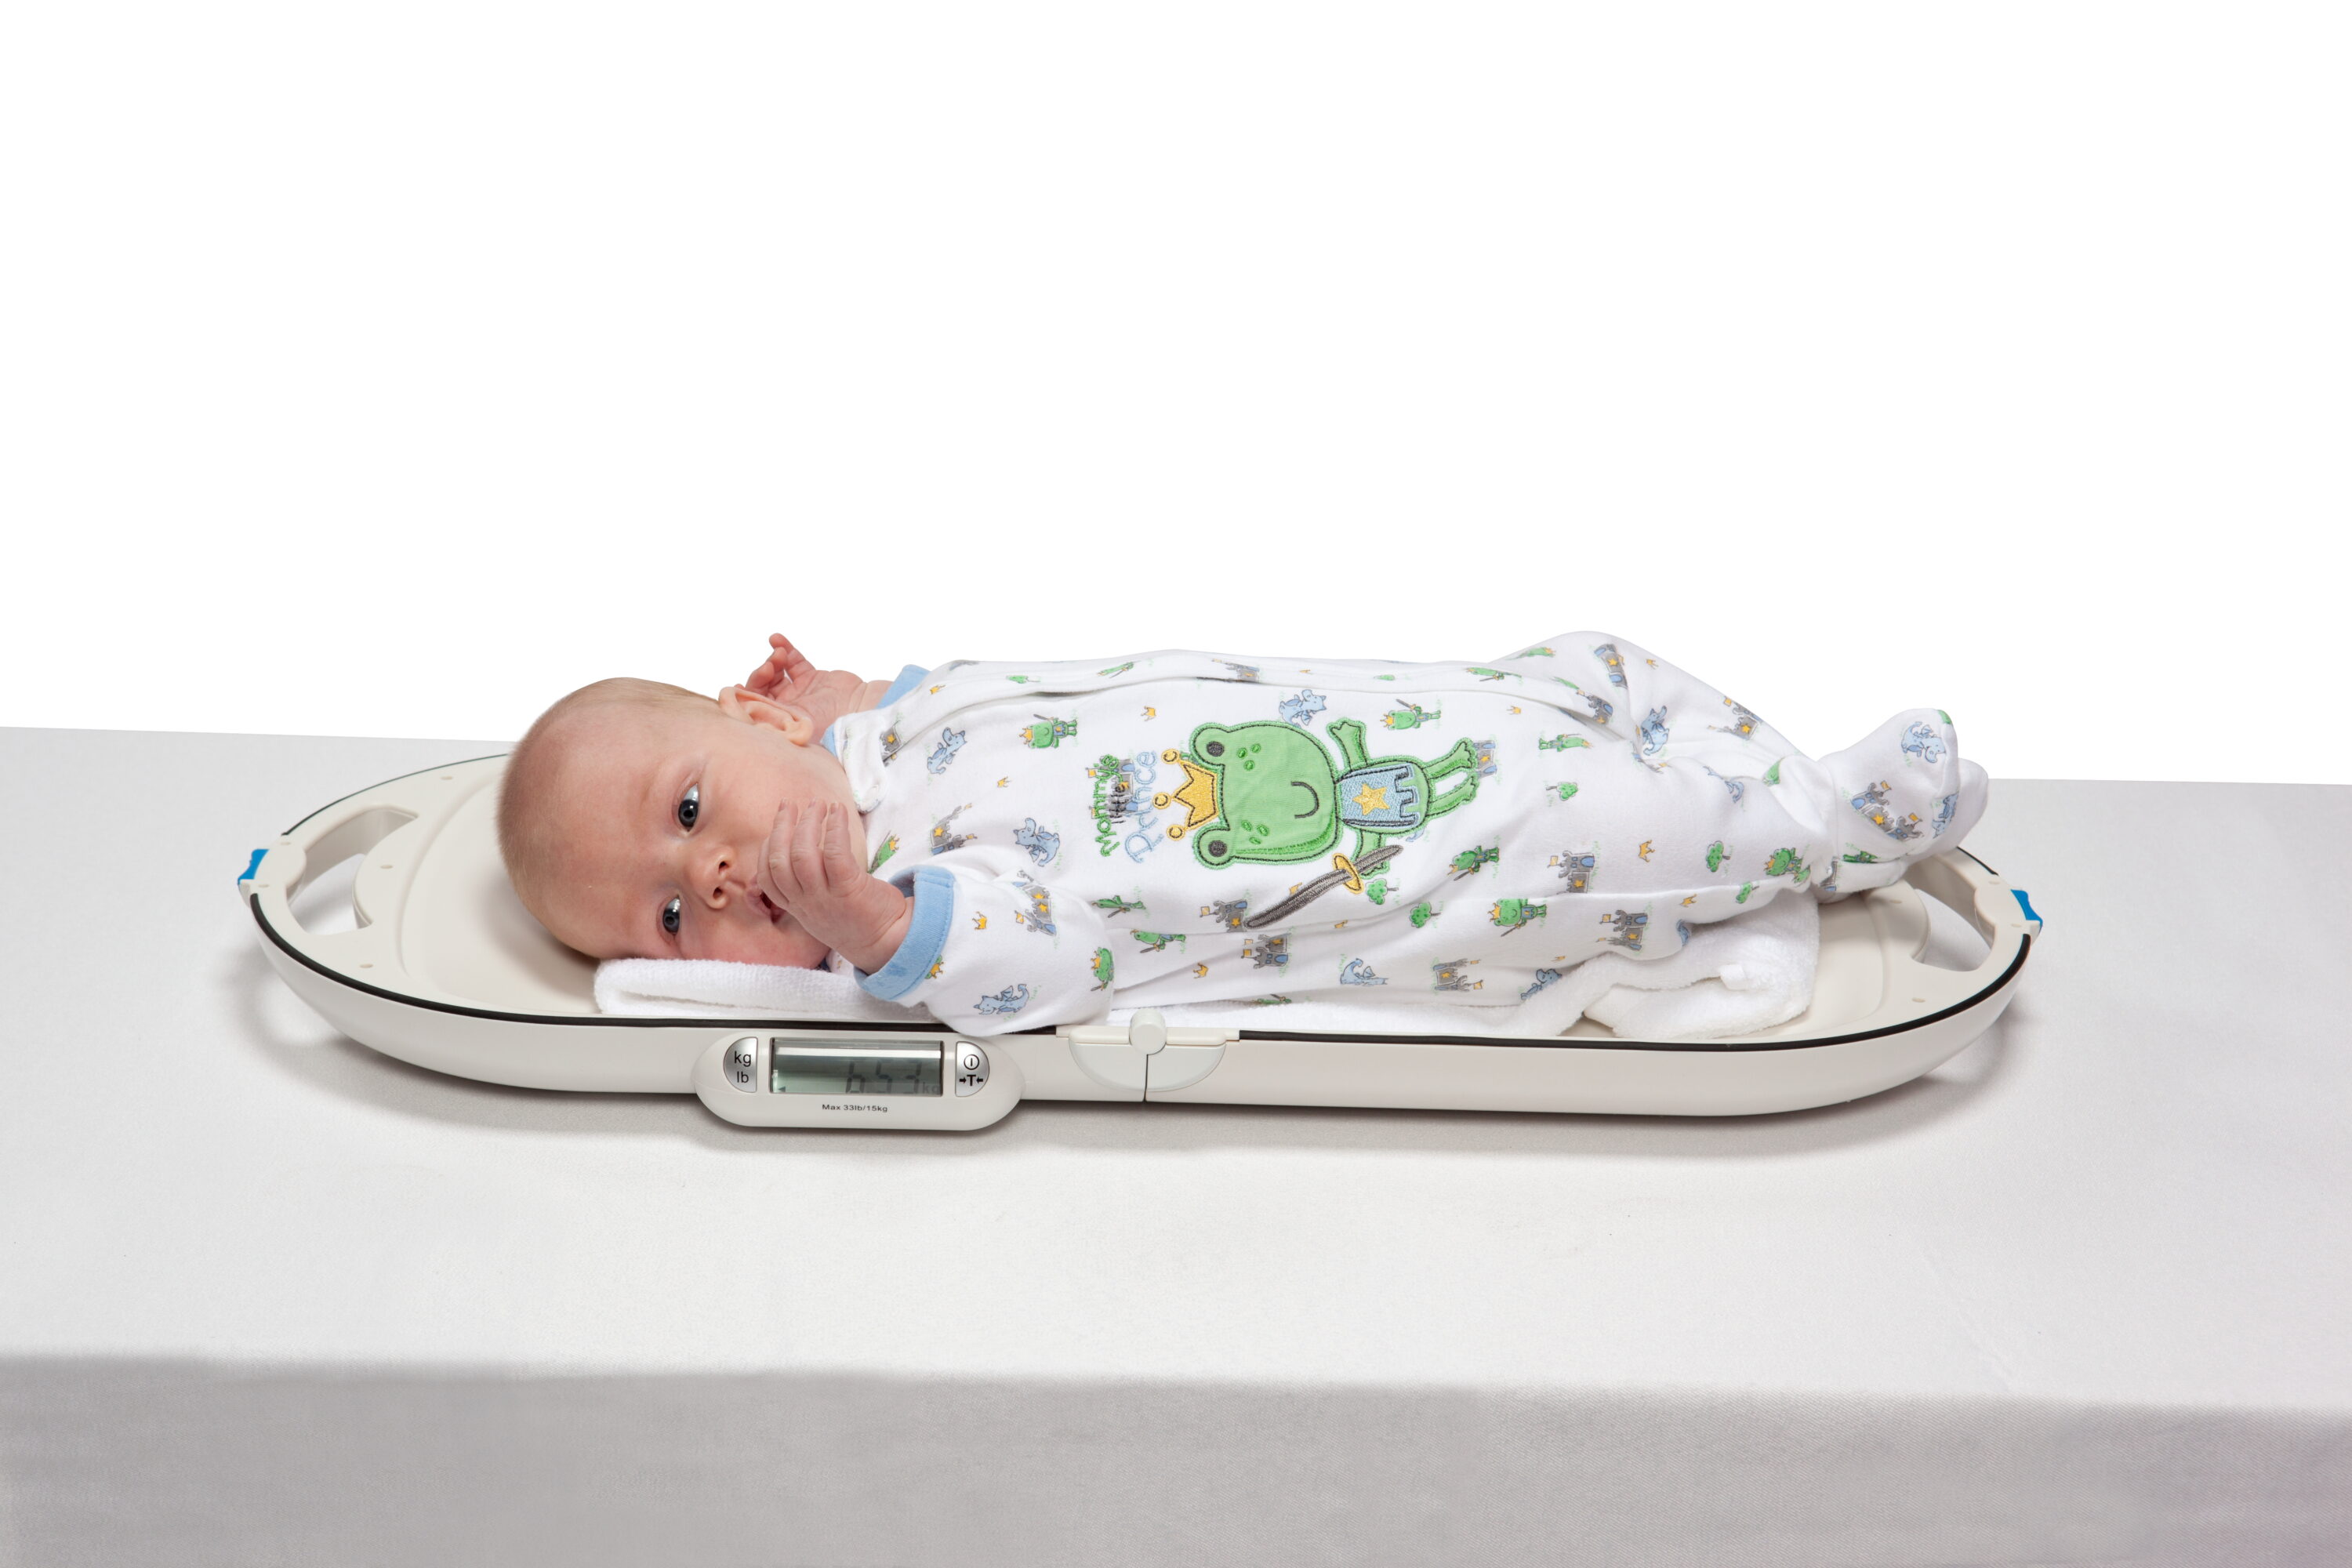 Health o Meter 553Kl Digital Portable Pediatric Baby Scale with Extra-Wide  Tray, 44 Lb X 0.5 Oz